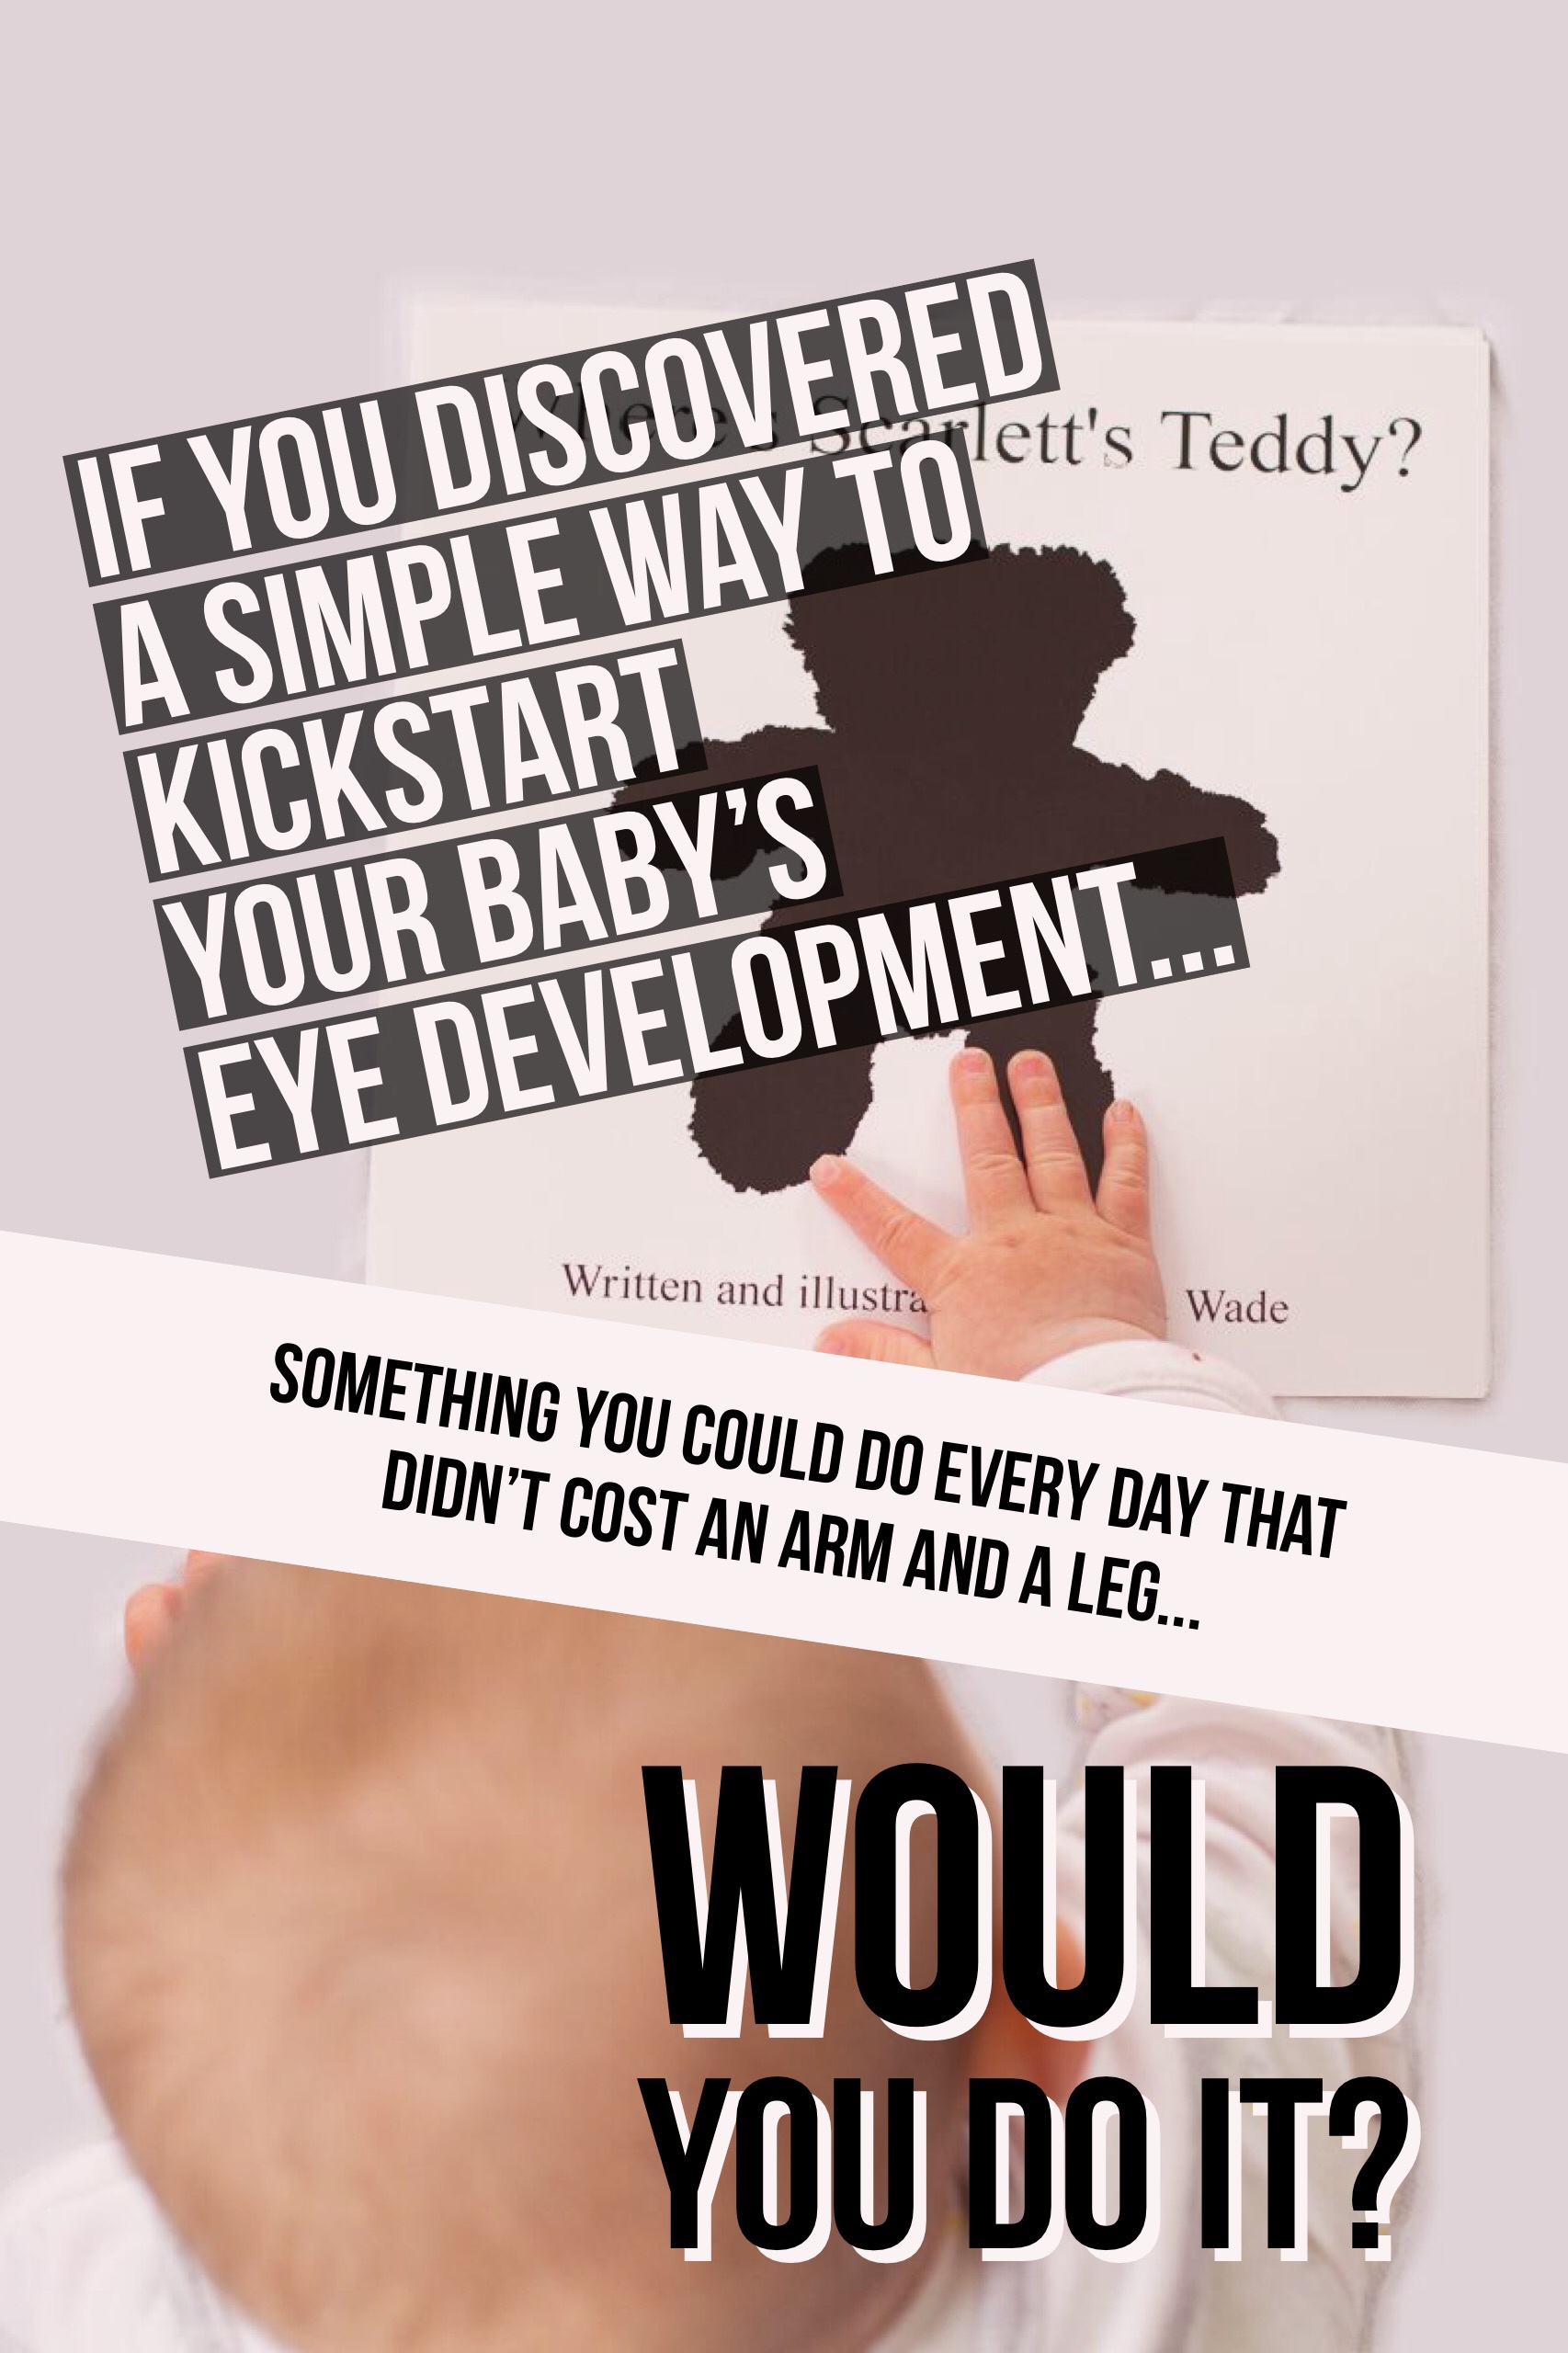 A picture of a baby engaging with their very own copy of 'Where's My Teddy?' overlaid with text that says: if you discovered a simple way to kickstart your baby's eye development, something you could do every day that didn't cost an arm and a leg, would you do it?